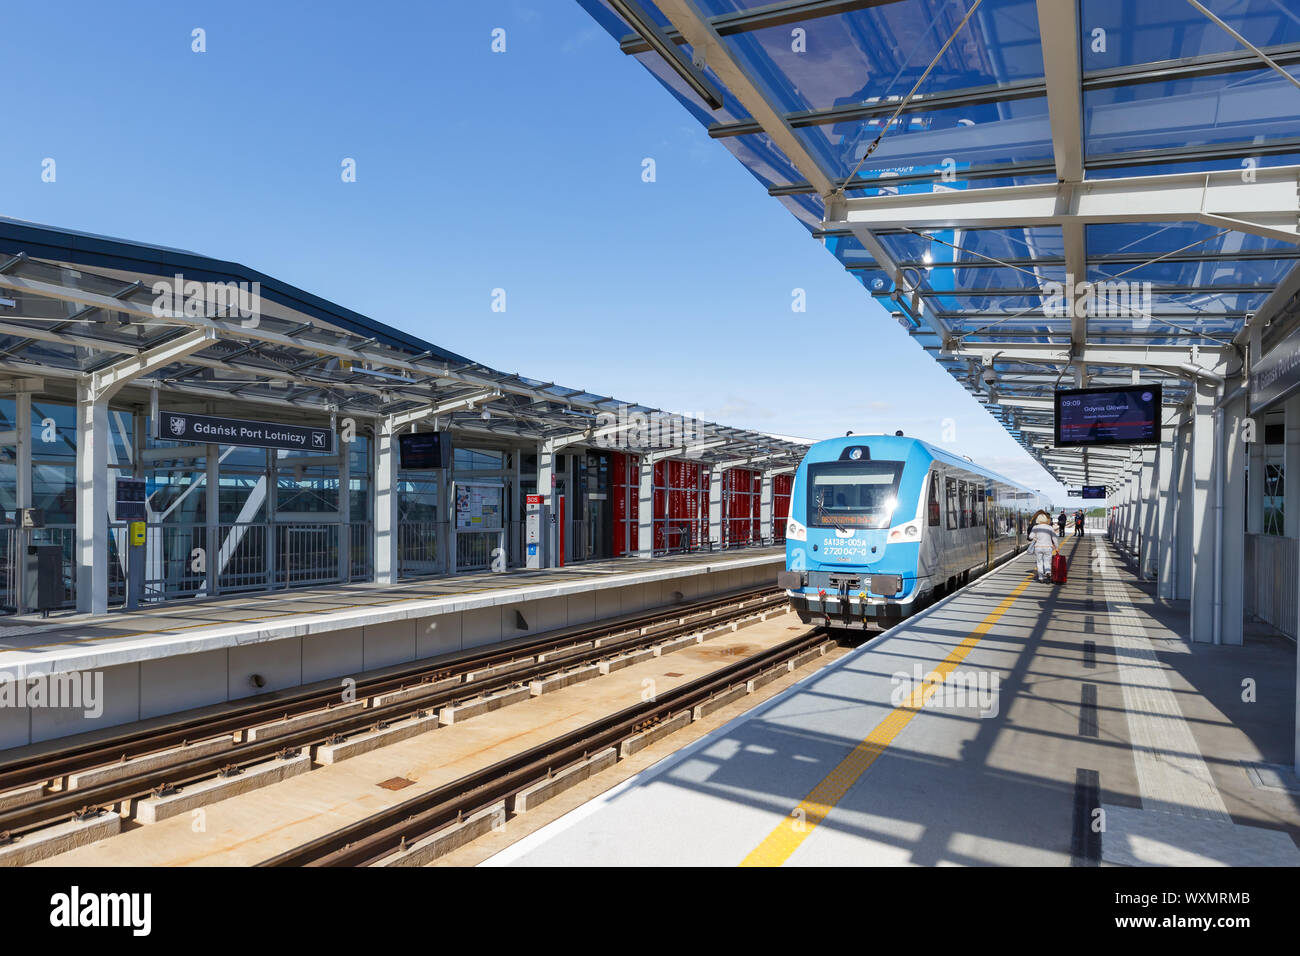 Gdansk, Poland – May 29, 2019: Railway station at Gdansk airport (GDN) in Poland. Stock Photo